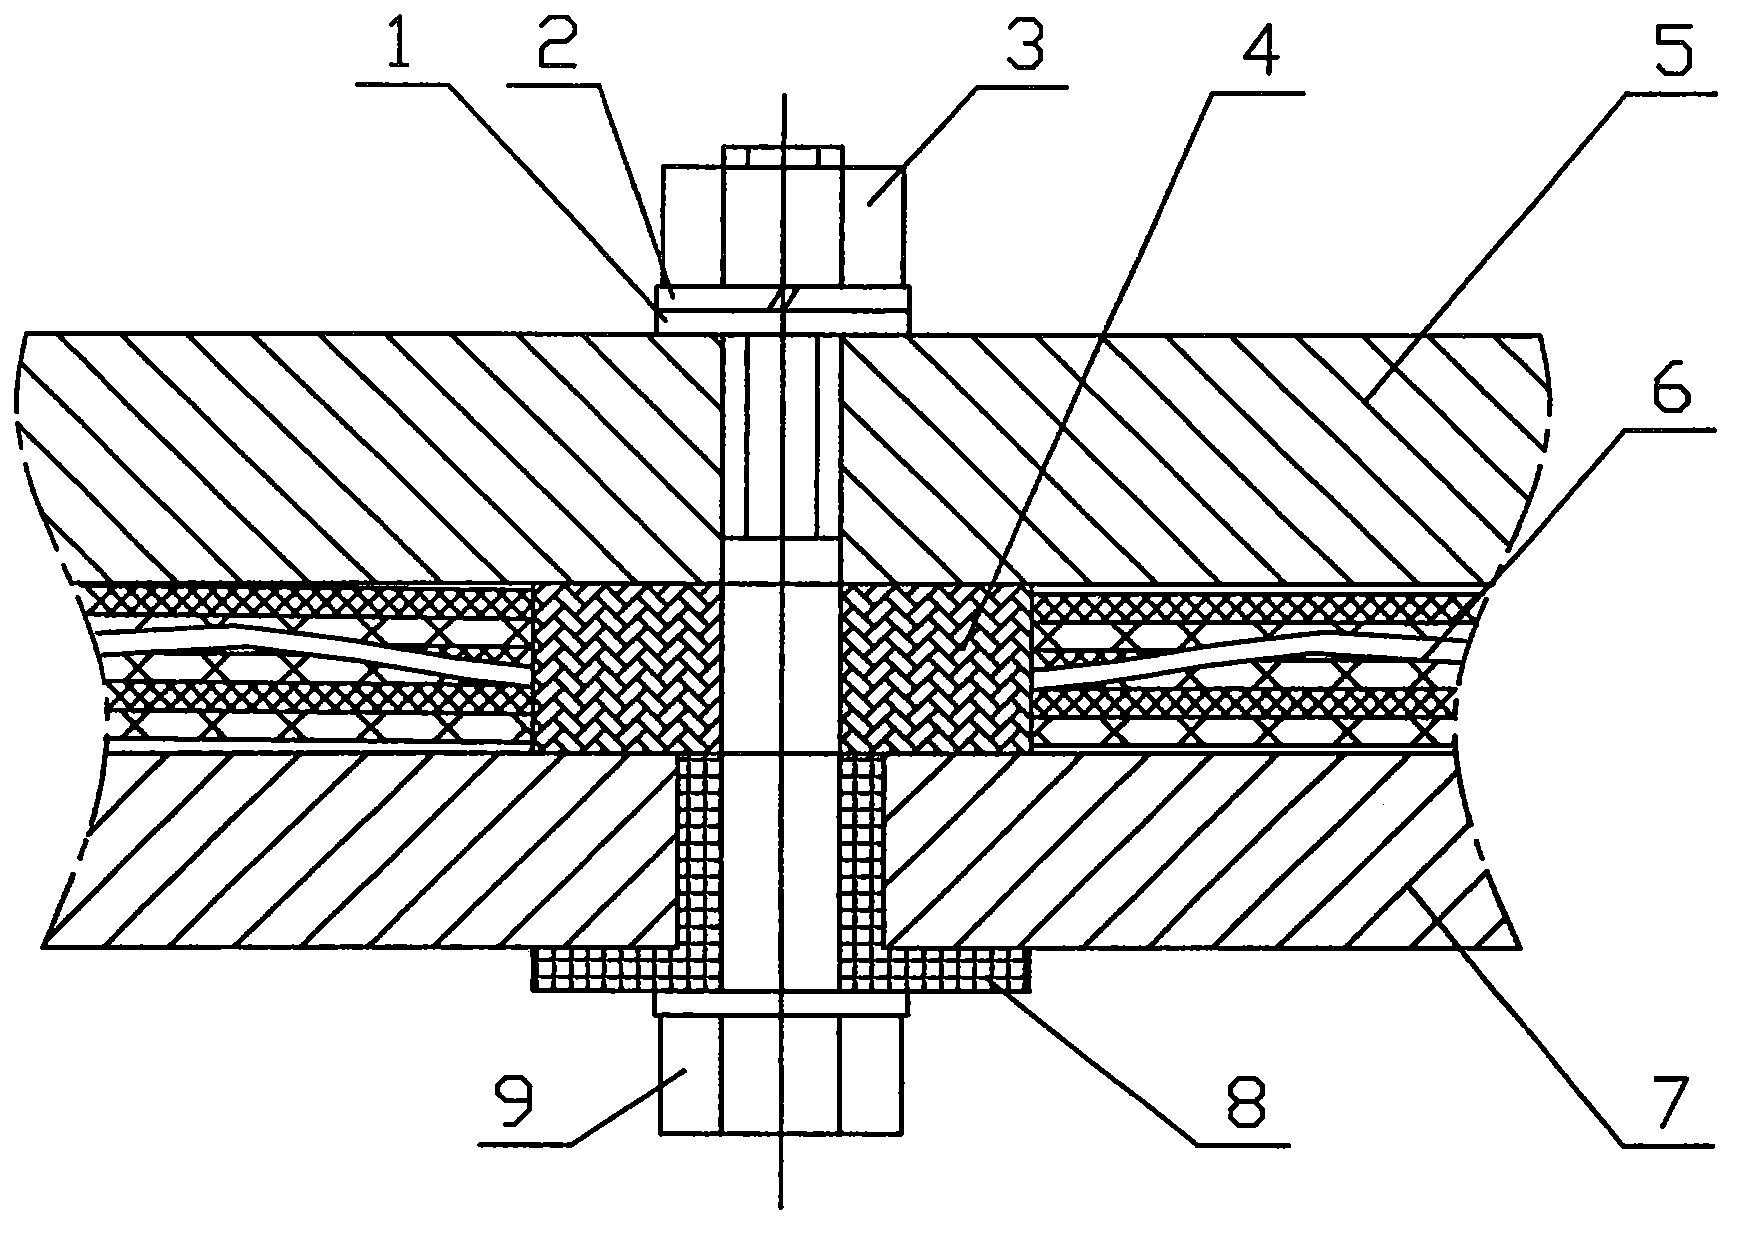 Thermal insulation connection device for space metal surfaces